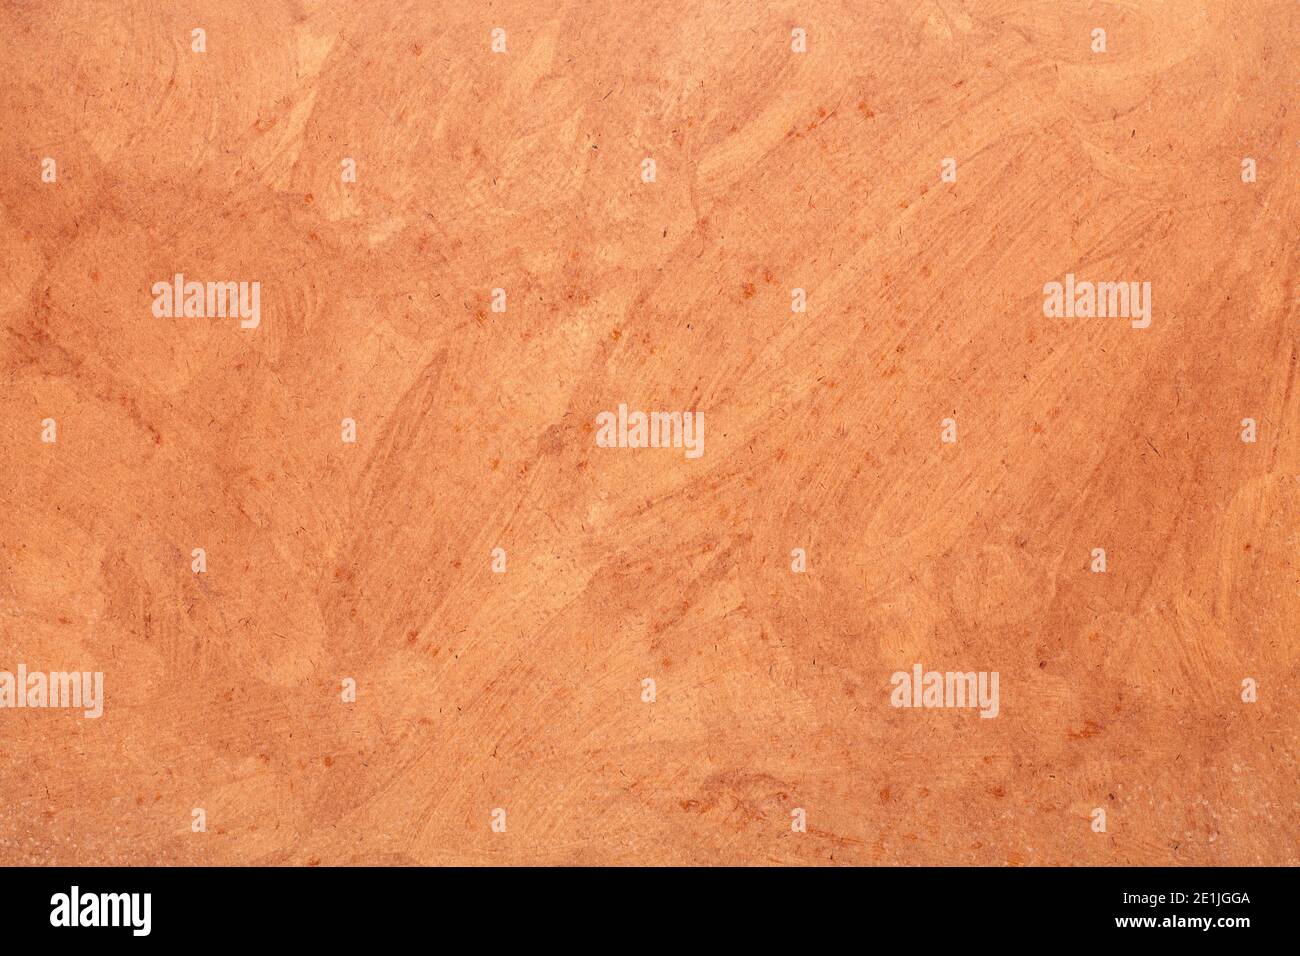 Brown paper with brush strokes and dust, texture background Stock Photo